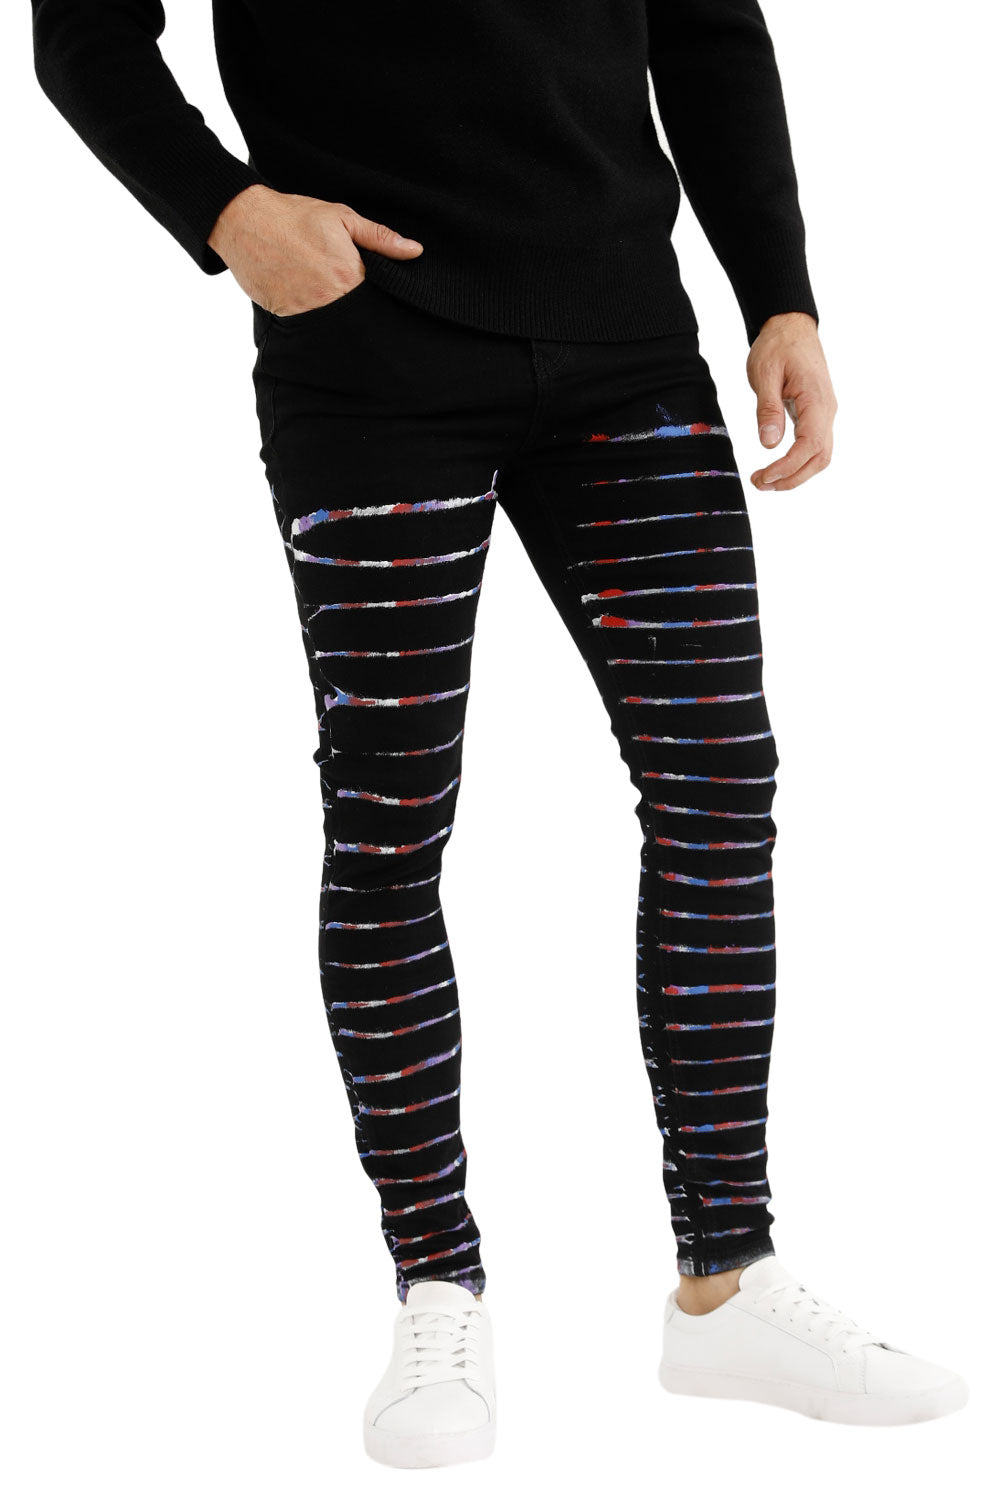 Heren Stijlvolle Hiphop Skinny Jeans Stretch Jeans